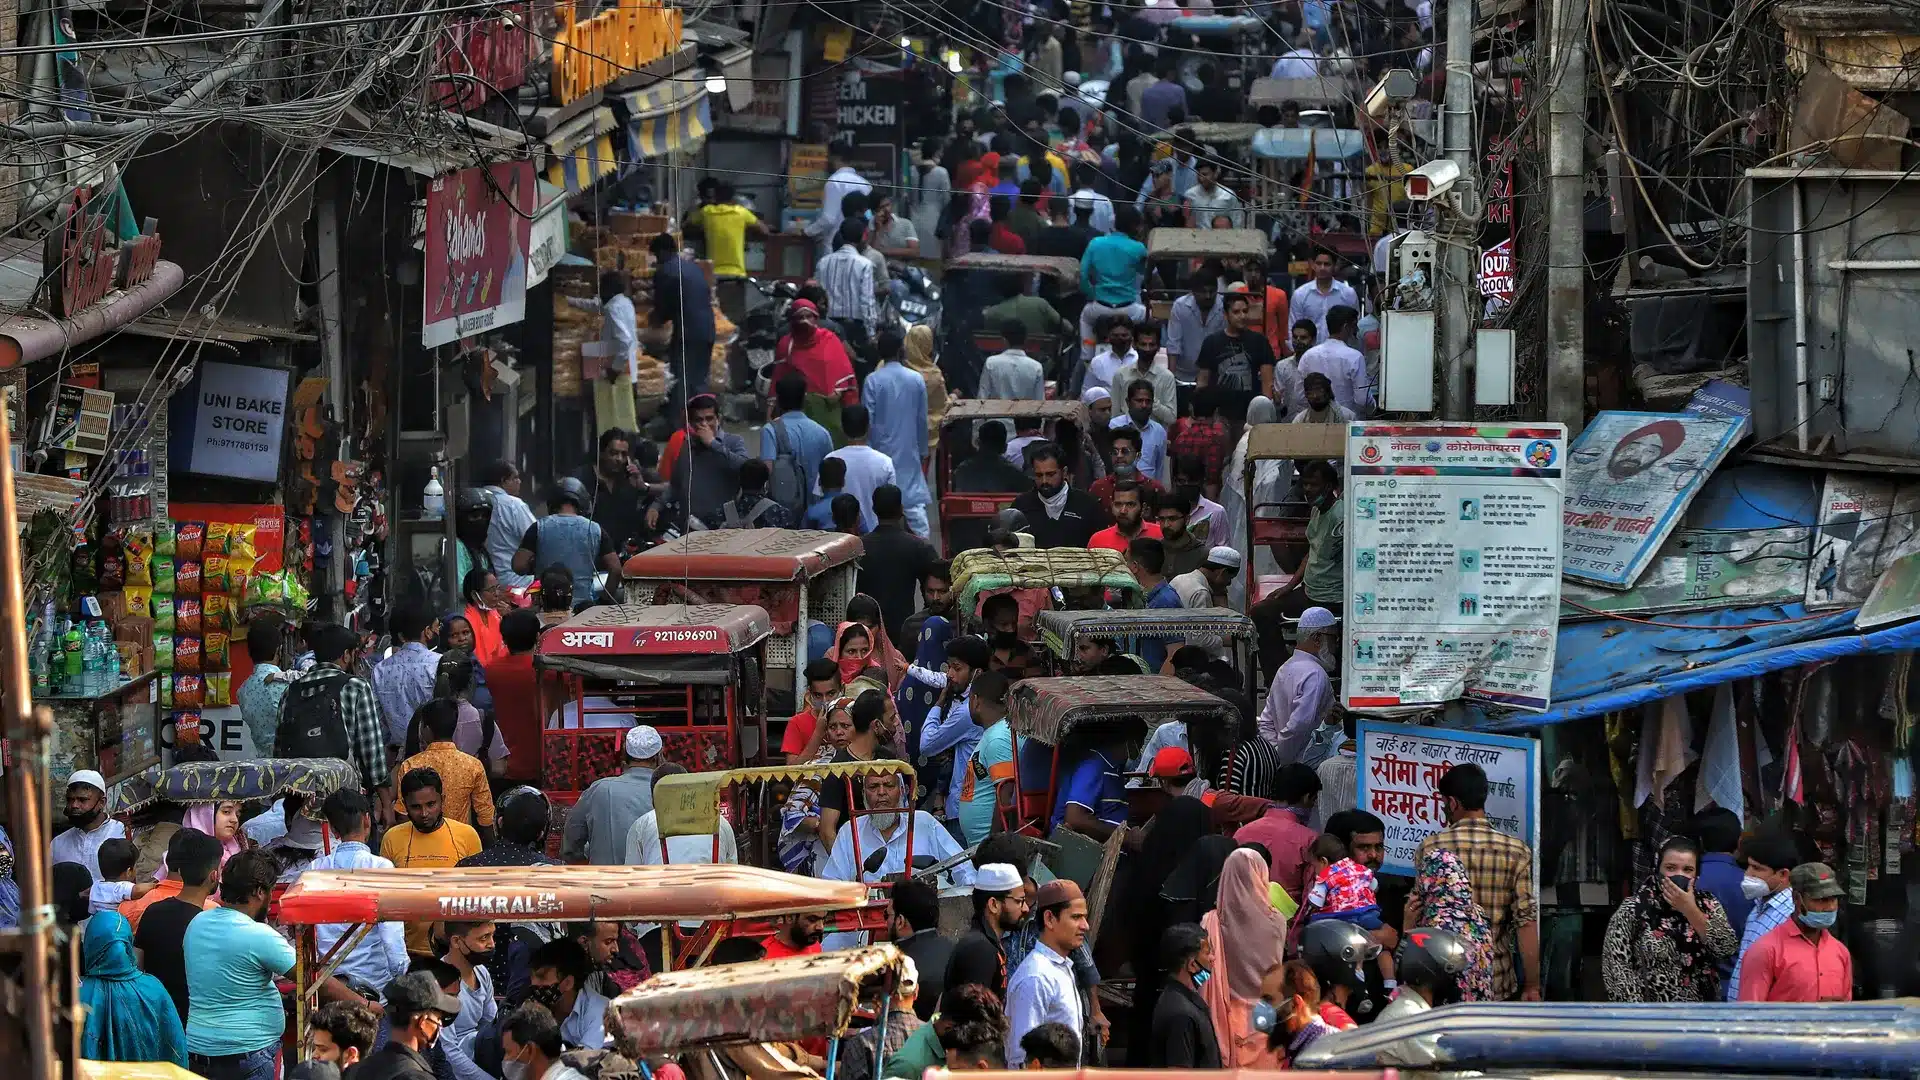 India faces diverse challenges beyond economics, including imminent overtaking of China as the world's most populous nation [Getty Images].